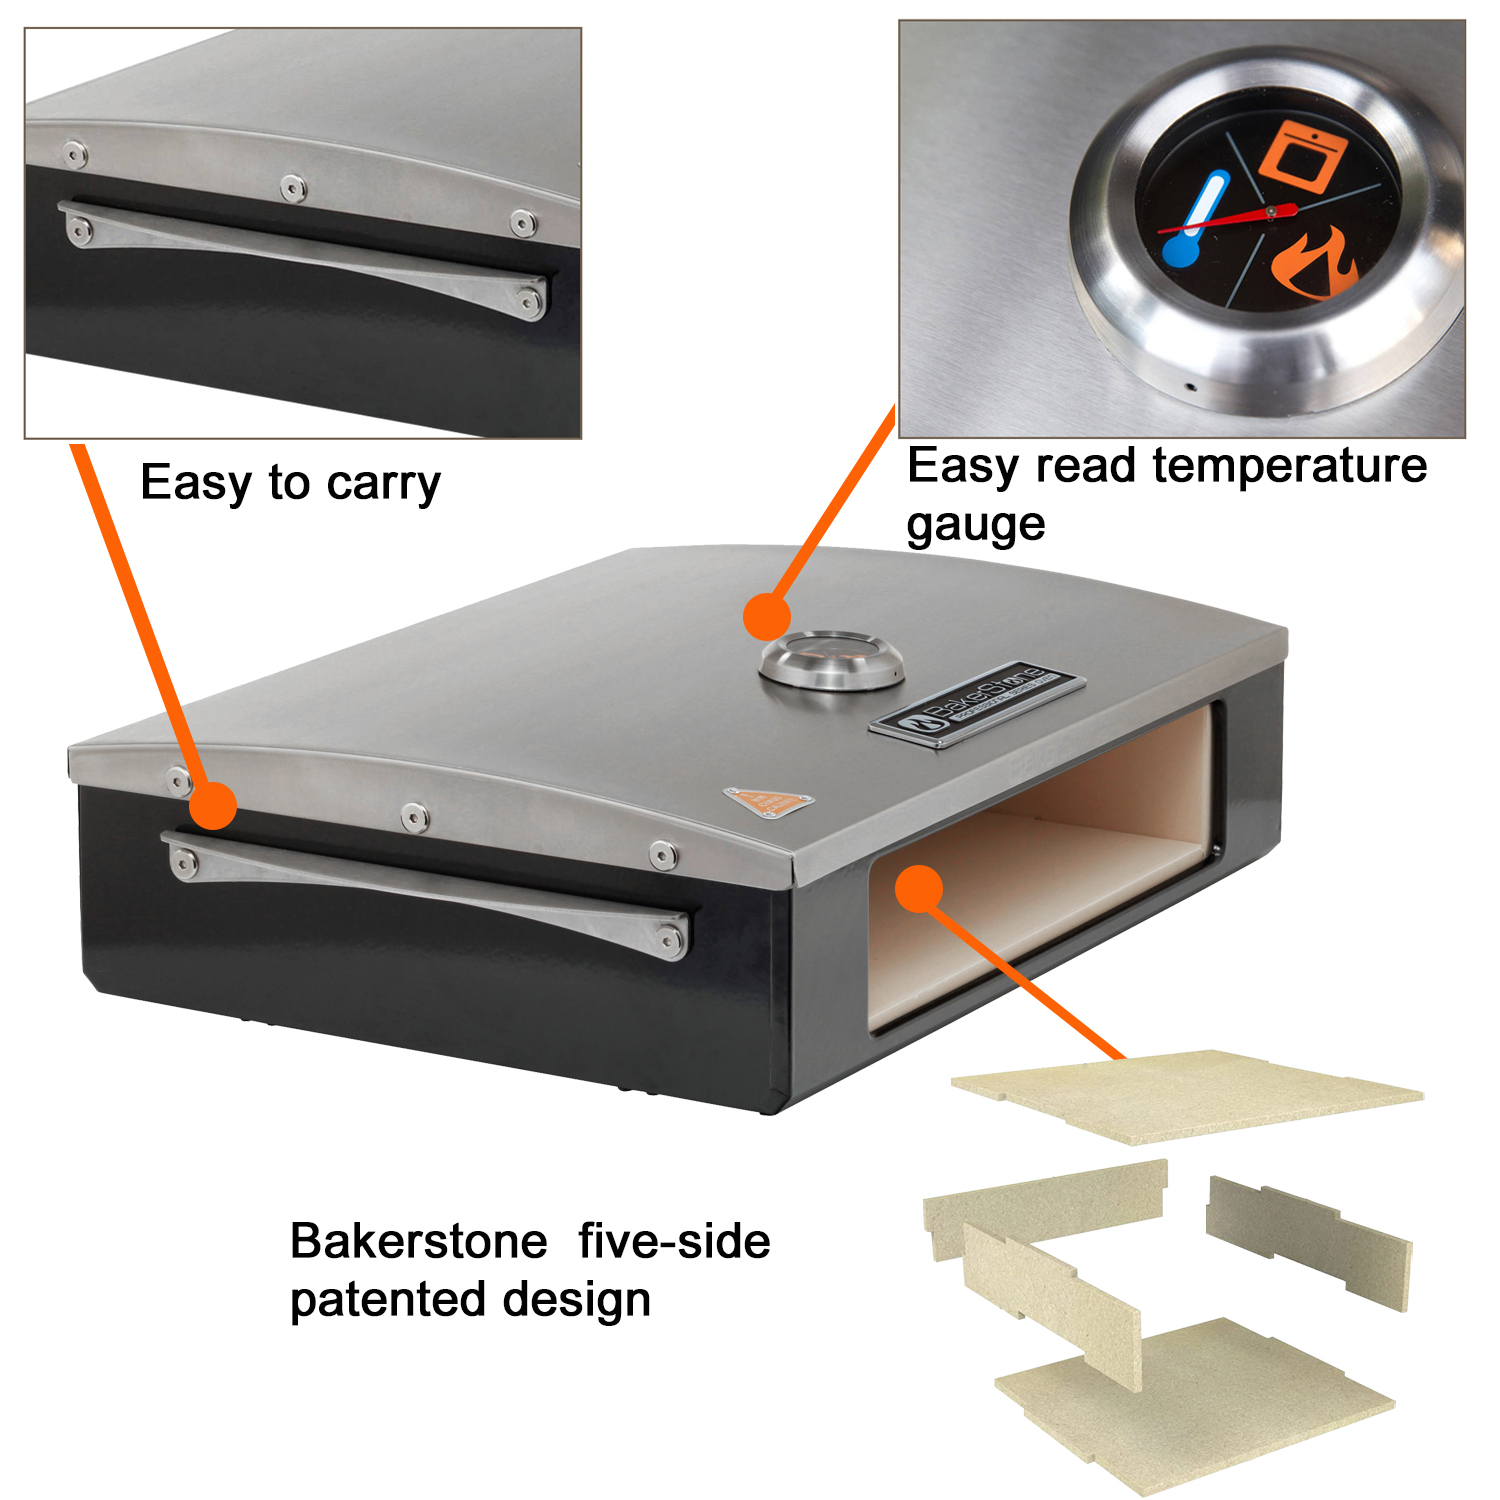 BakerStone Professional Series Grill Top Pizza Oven Box - image 2 of 7